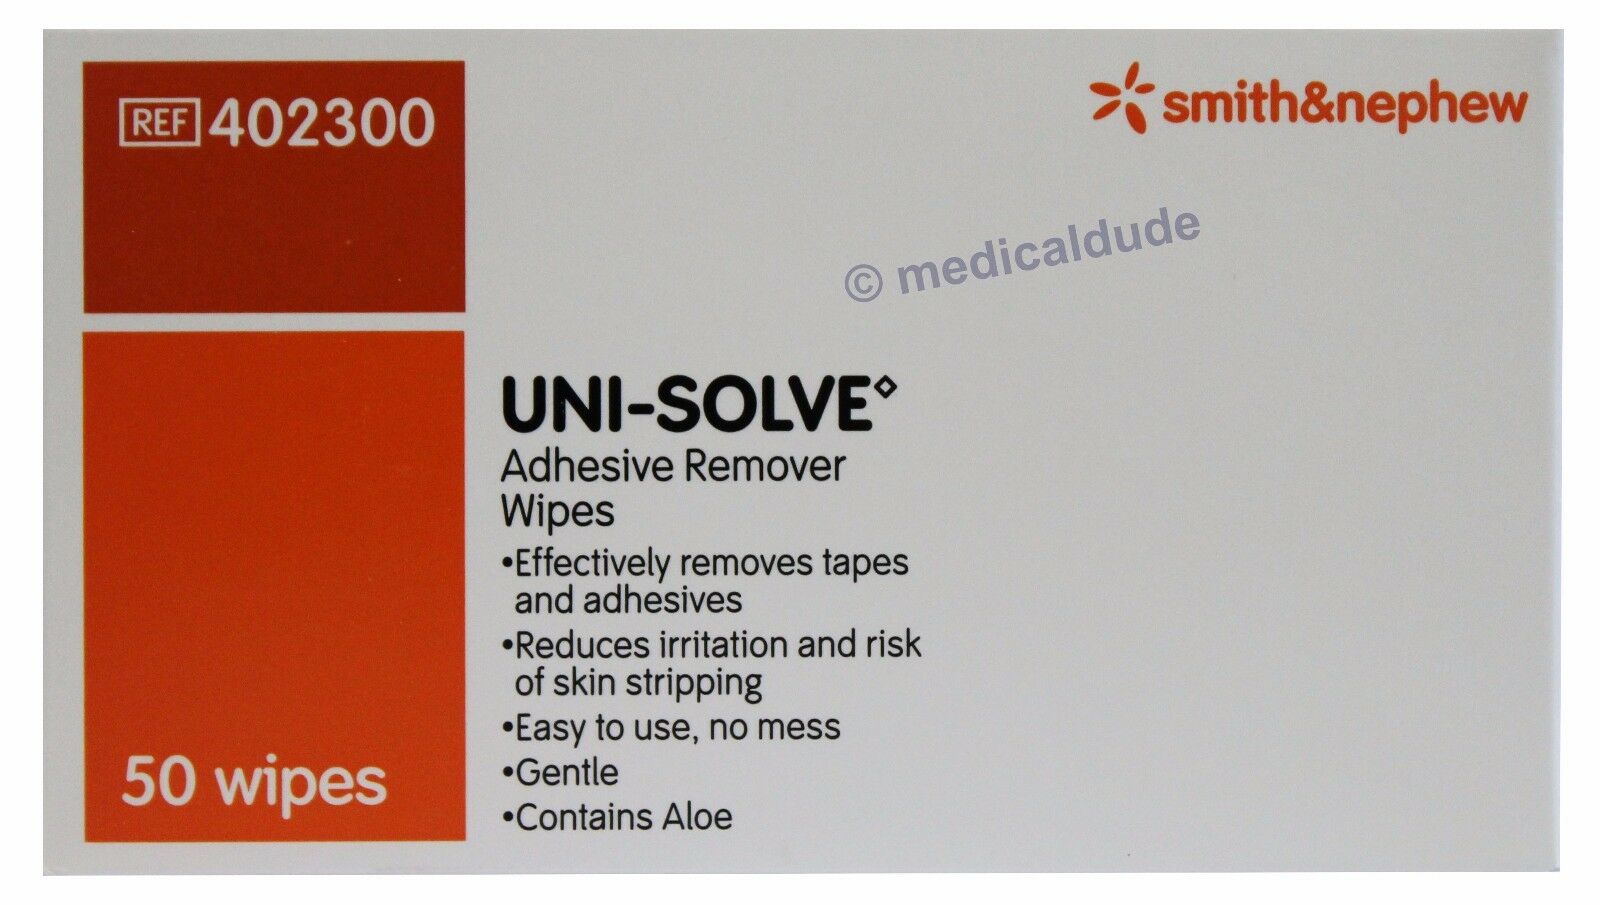 50 Pack Uni-solve Gentle No Mess Adhesive Remover Wipes Smith & Nephew